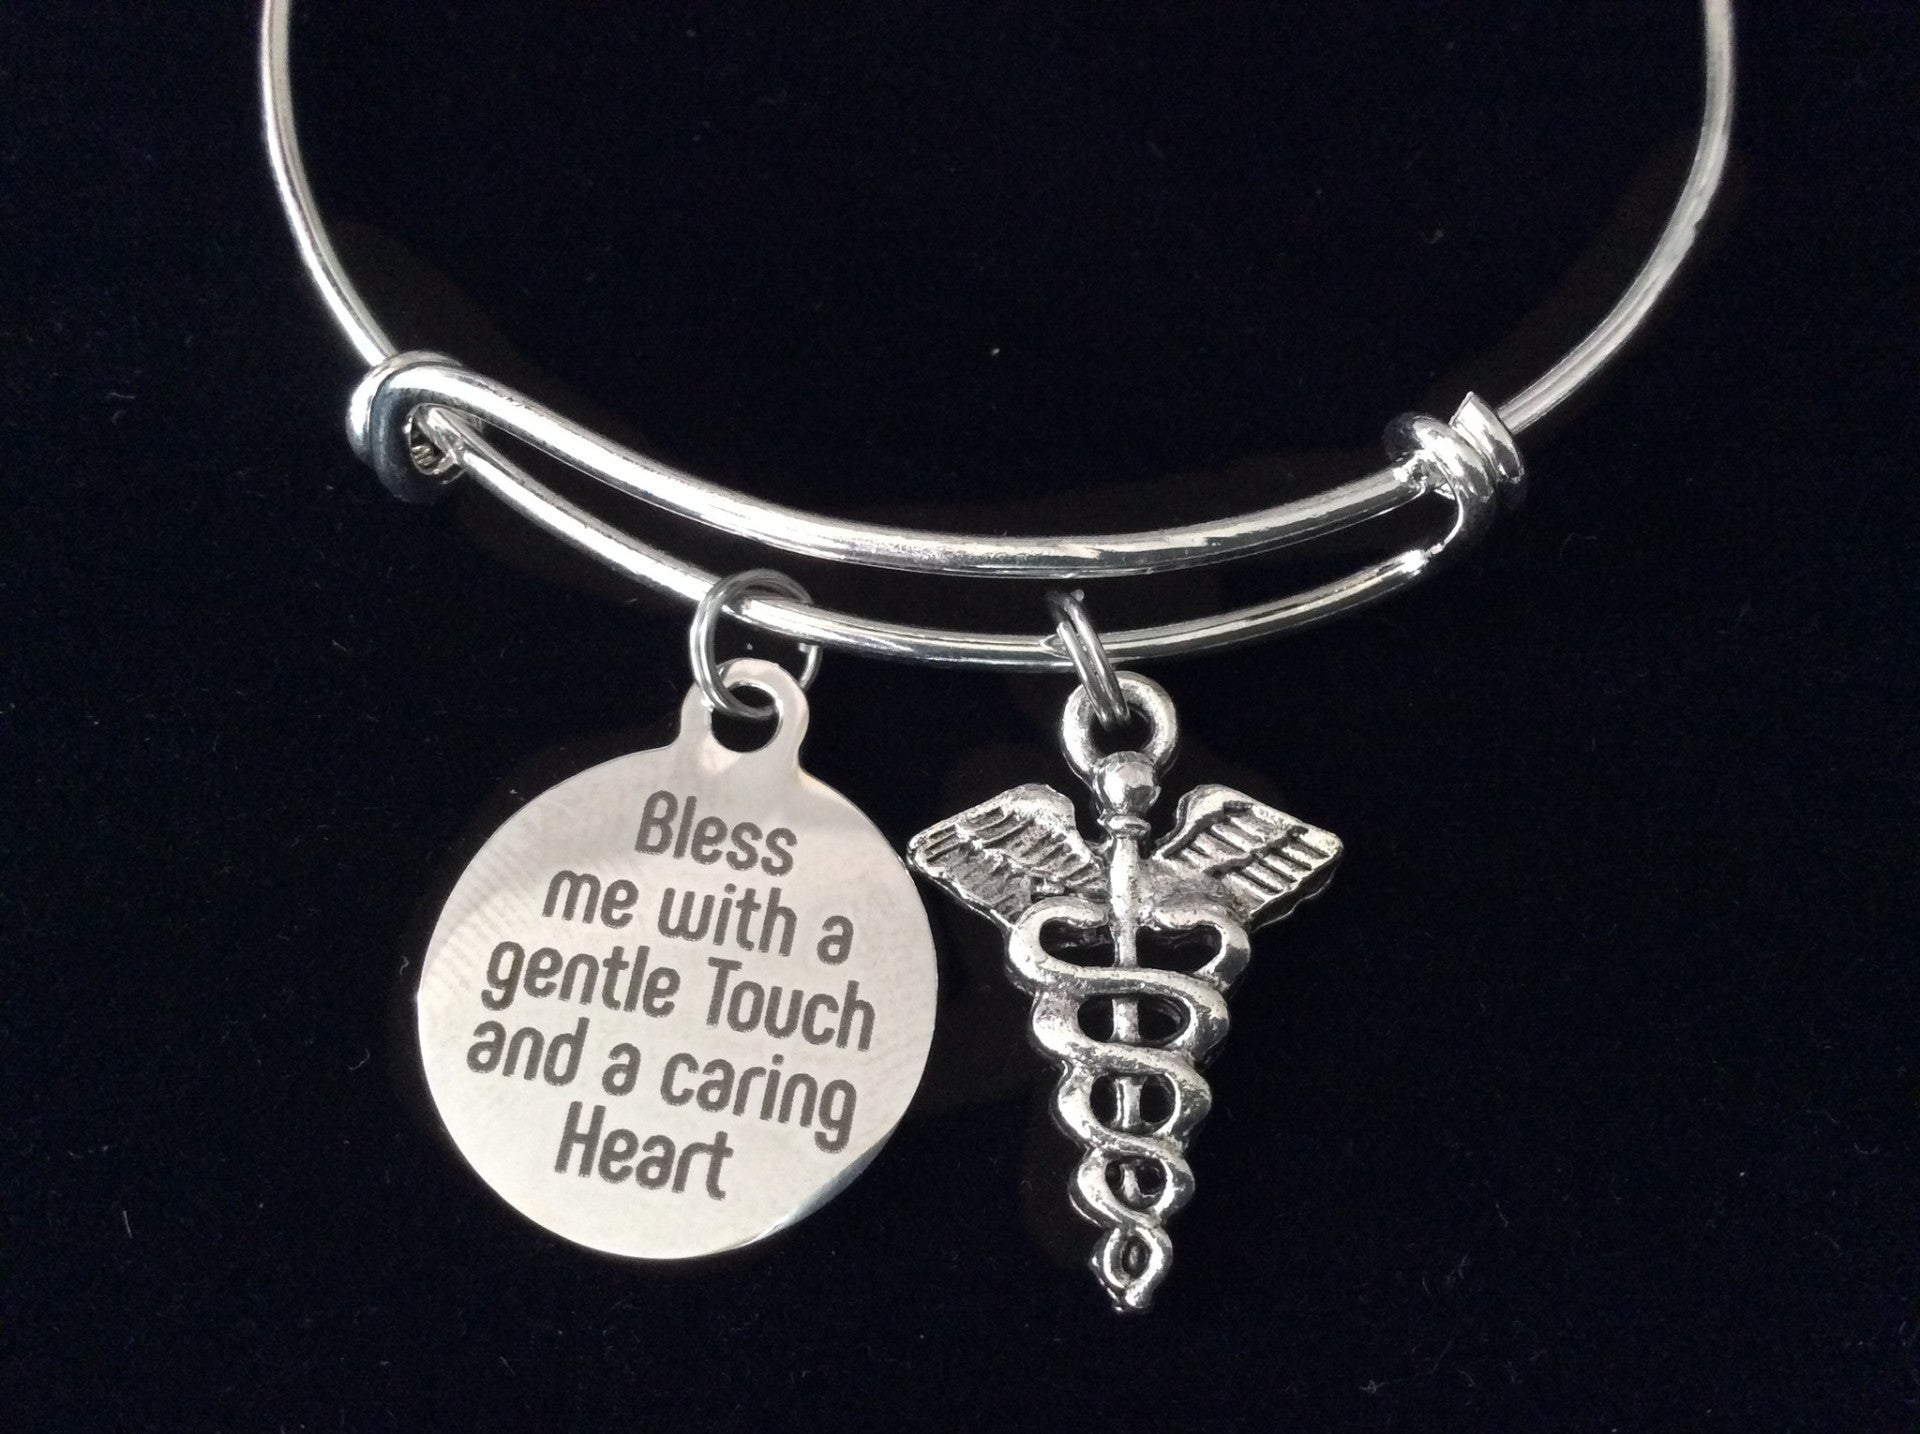 Bless Me with a Gentle Touch and Caring Heart Nurse Doctor Medical Expandable Charm Bracelet Silver 